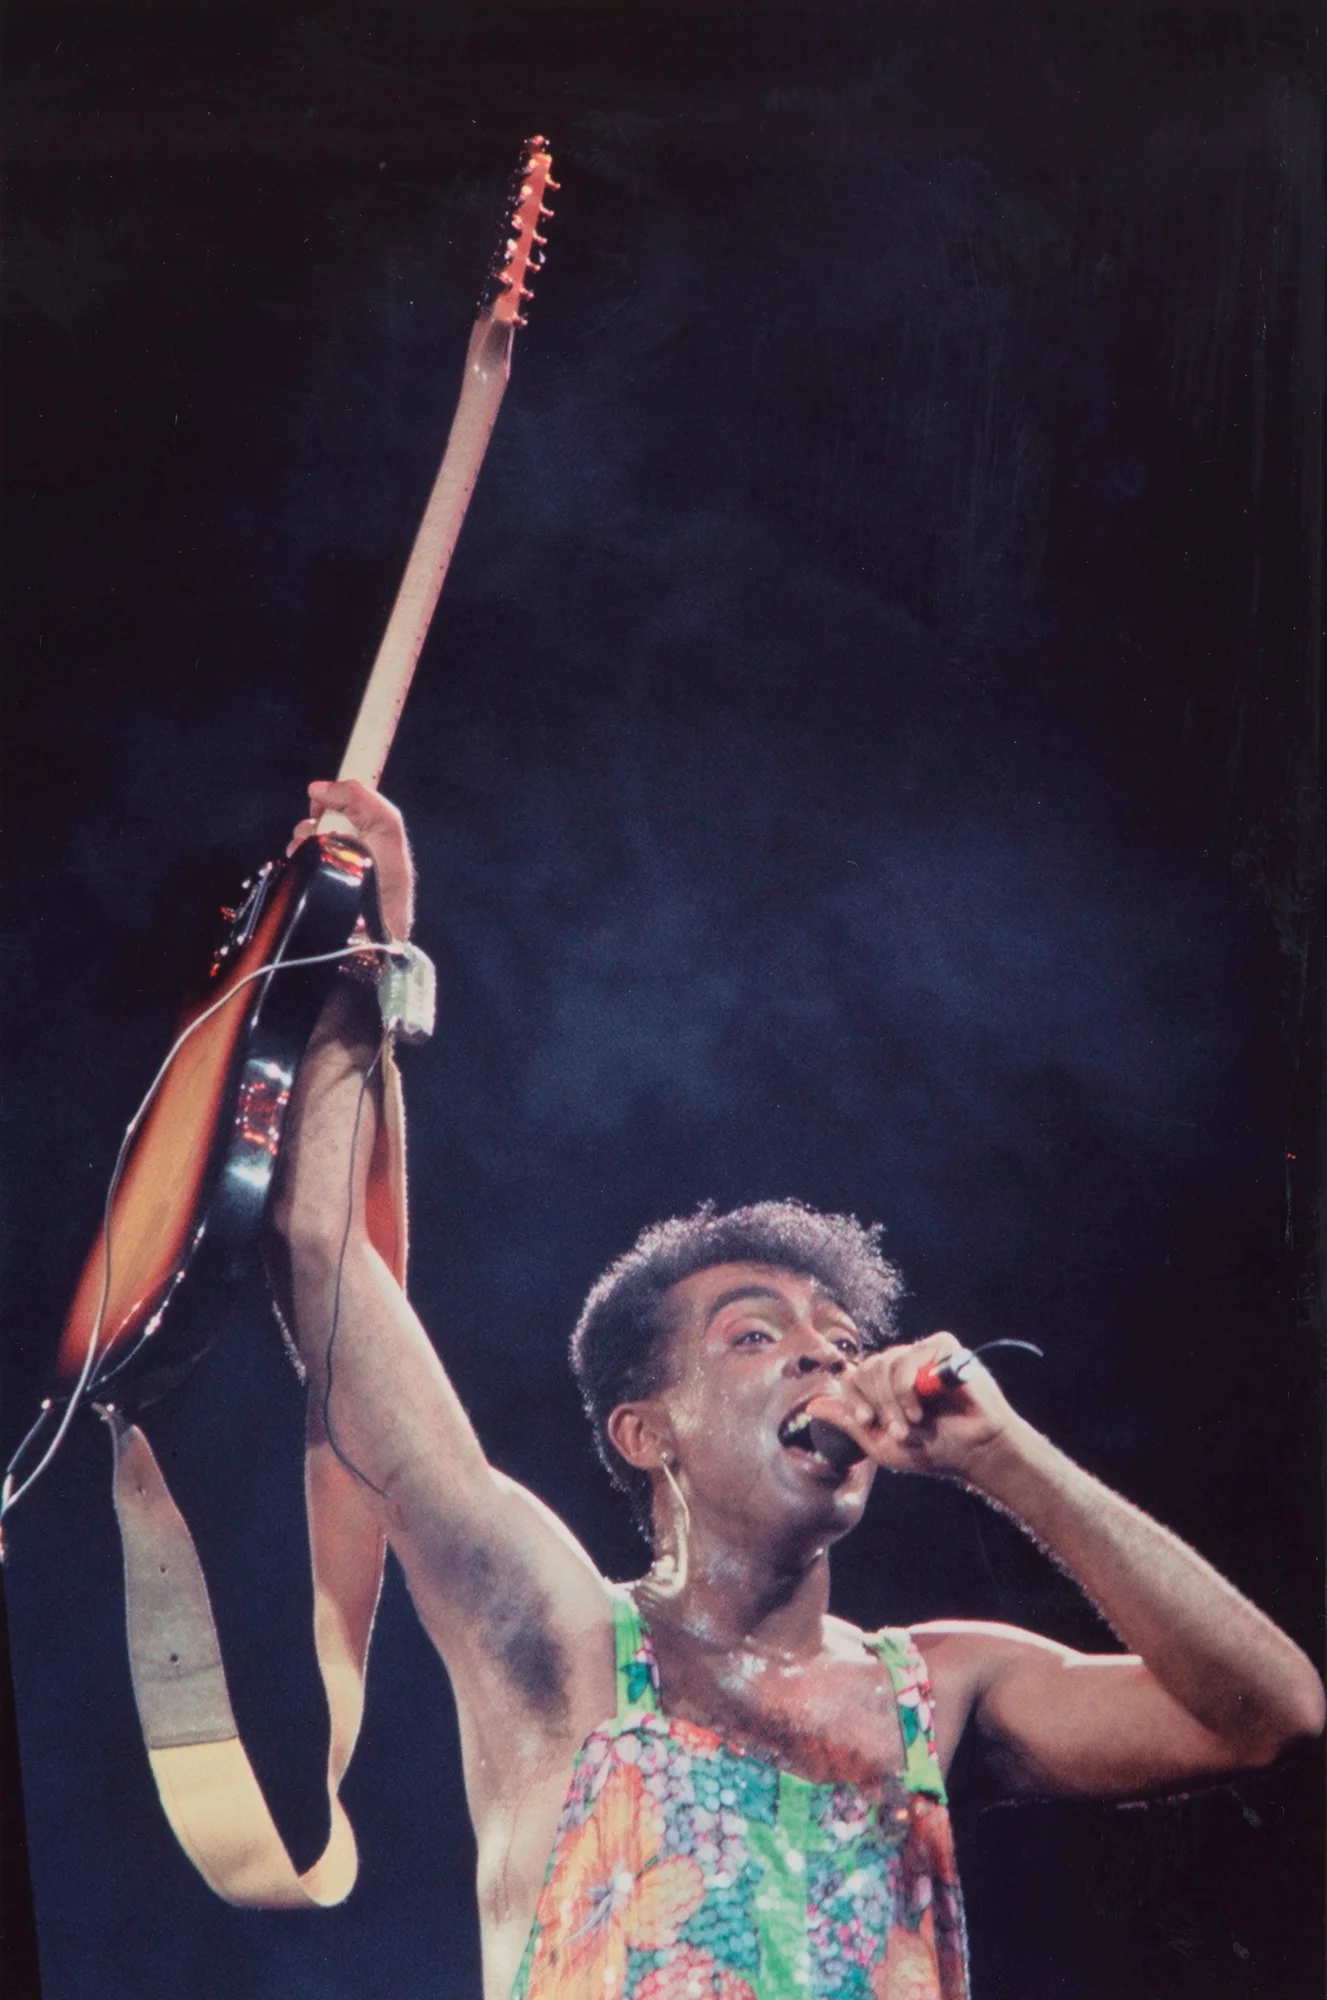 Gilberto Gil holding up his guitar and singing into the icrophone